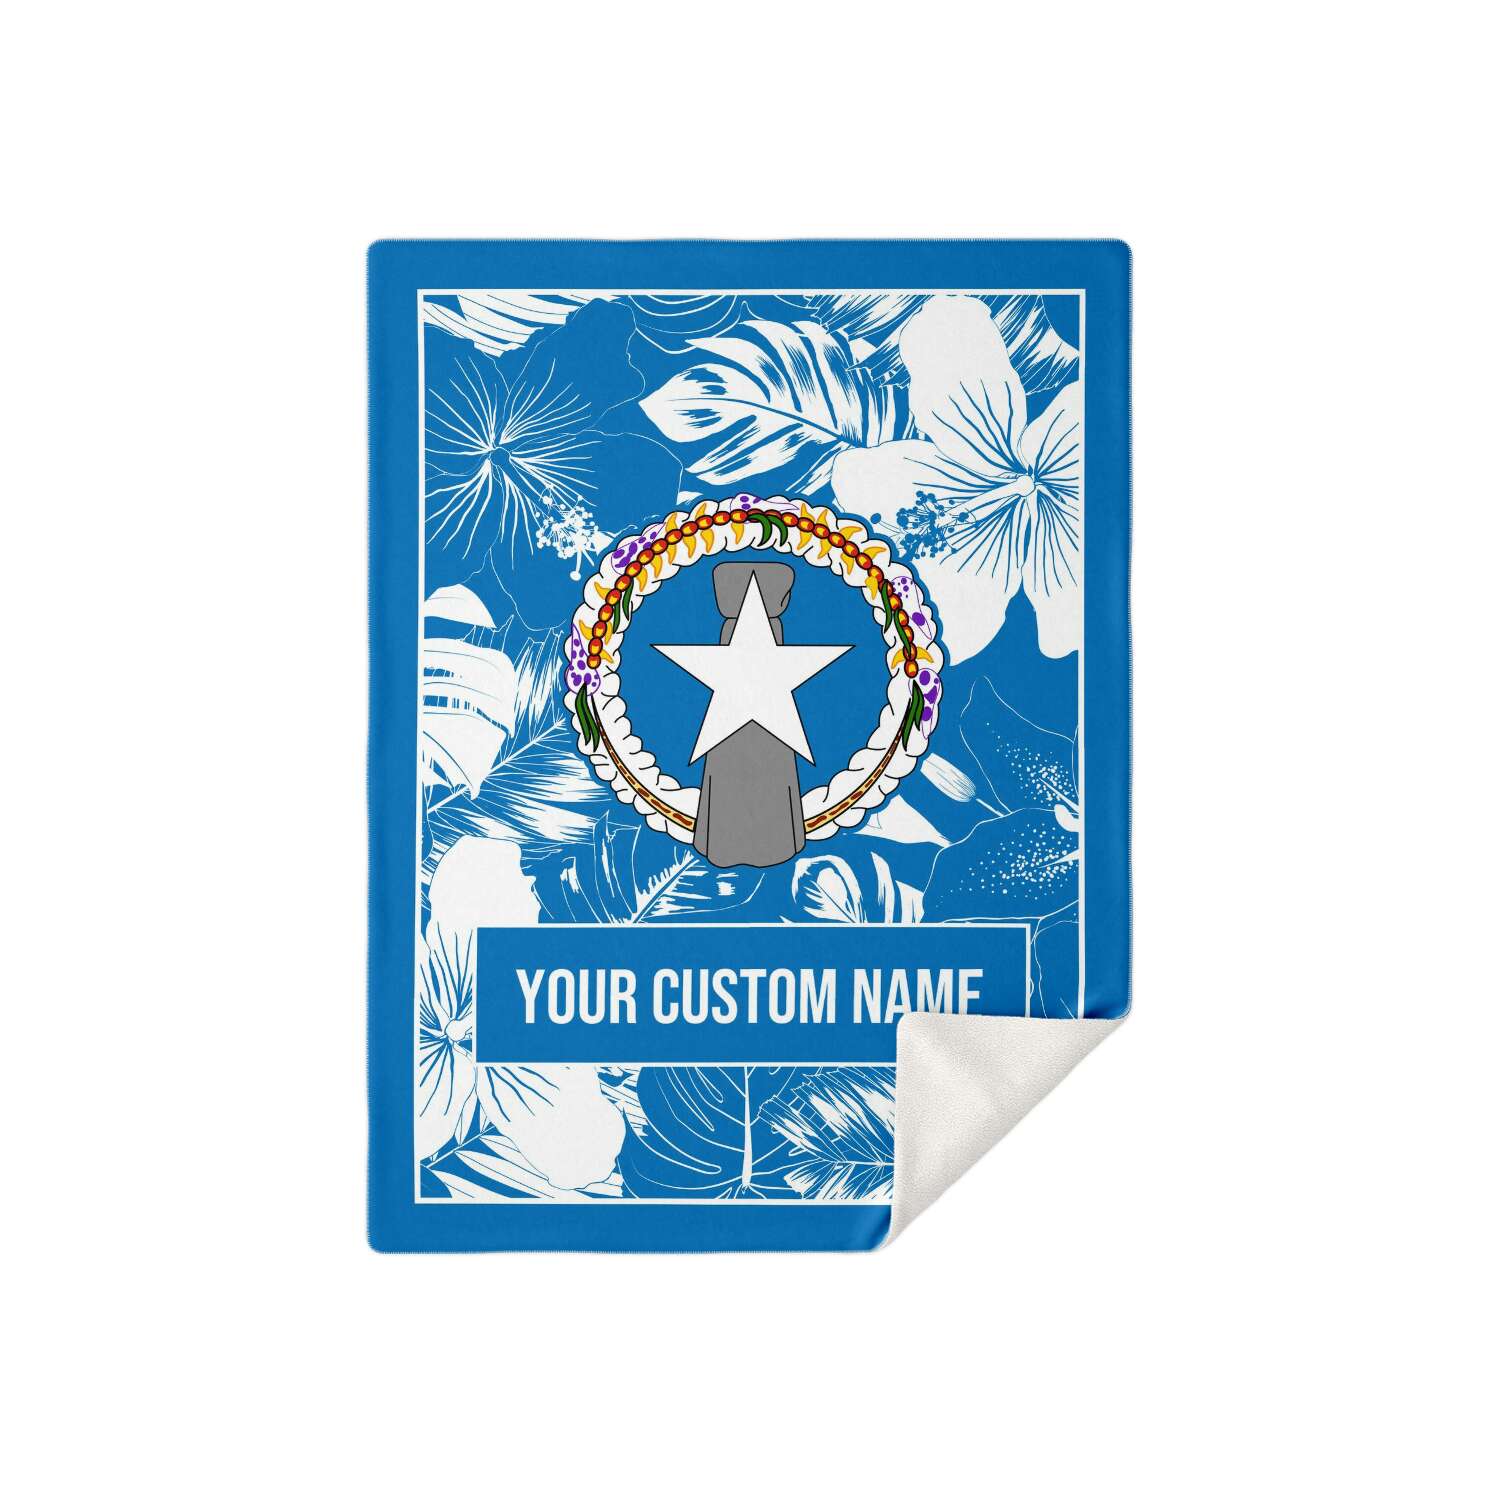 CNMI Seal Hibiscus Blue Microfleece Blanket with Personalization